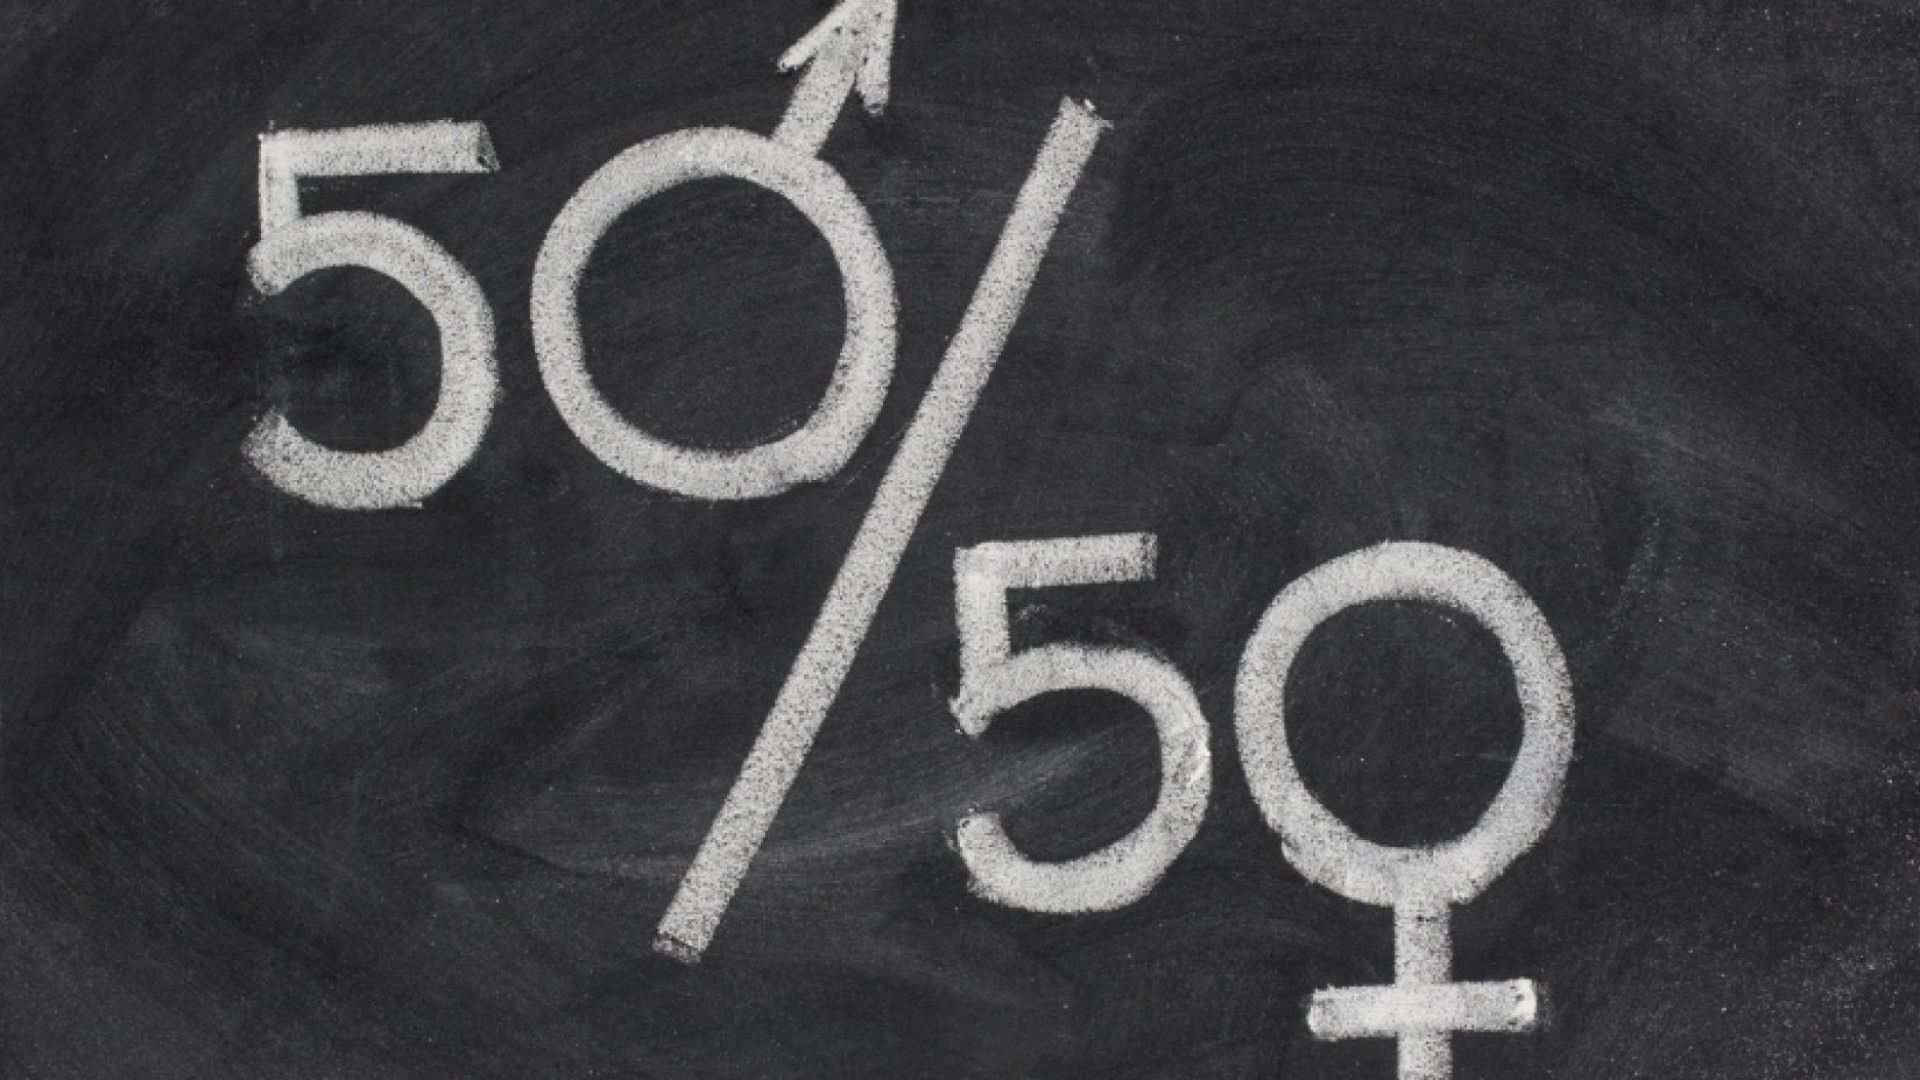 Reasons To Accelerate The Race For Gender Equality Inc